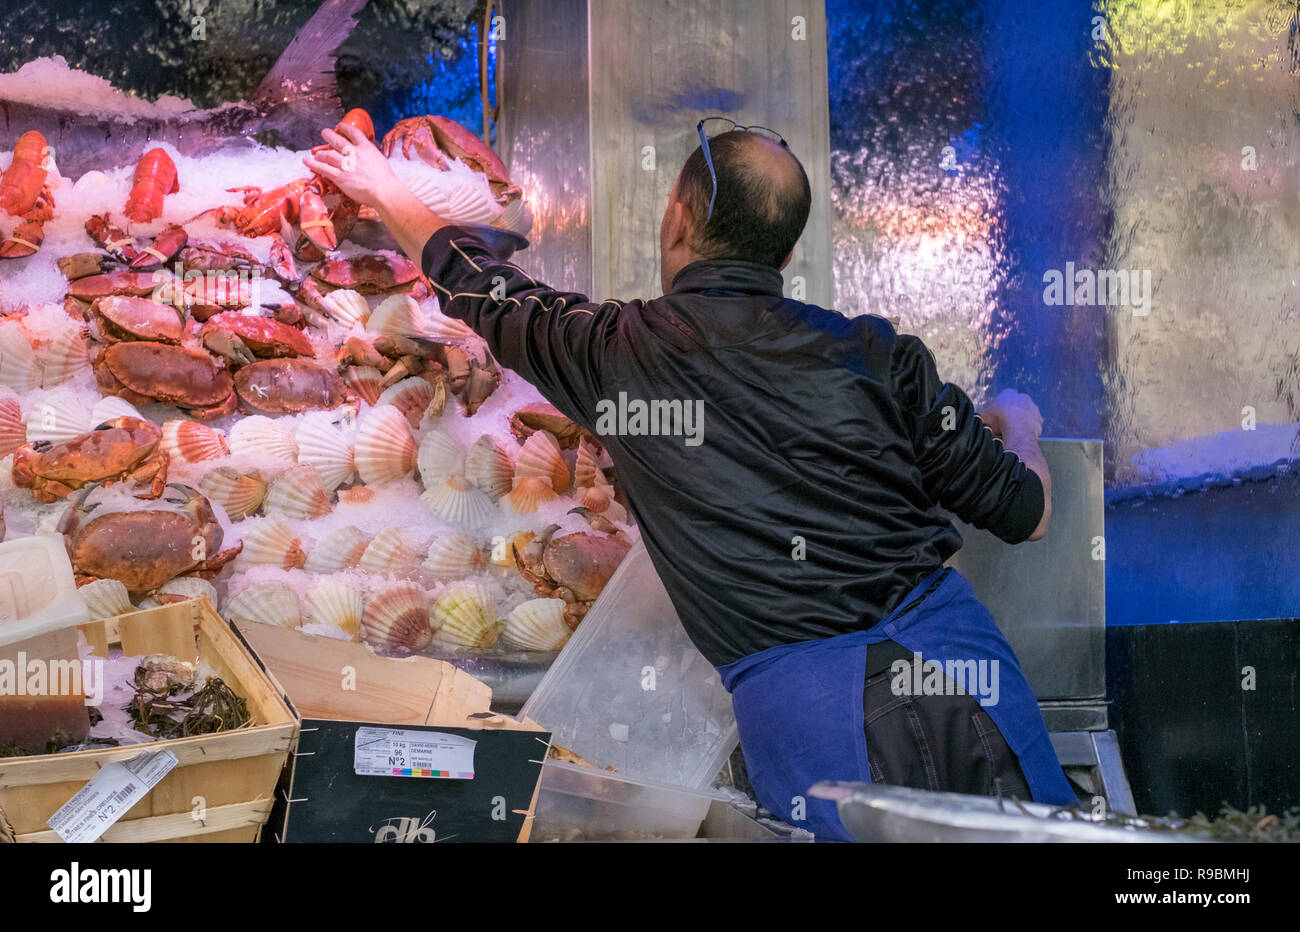 A fish monger arranges a display of fresh shellfish, including lobsters, crabs and scallops, on a bed of ice for sale in a nearby restaurant. Stock Photo